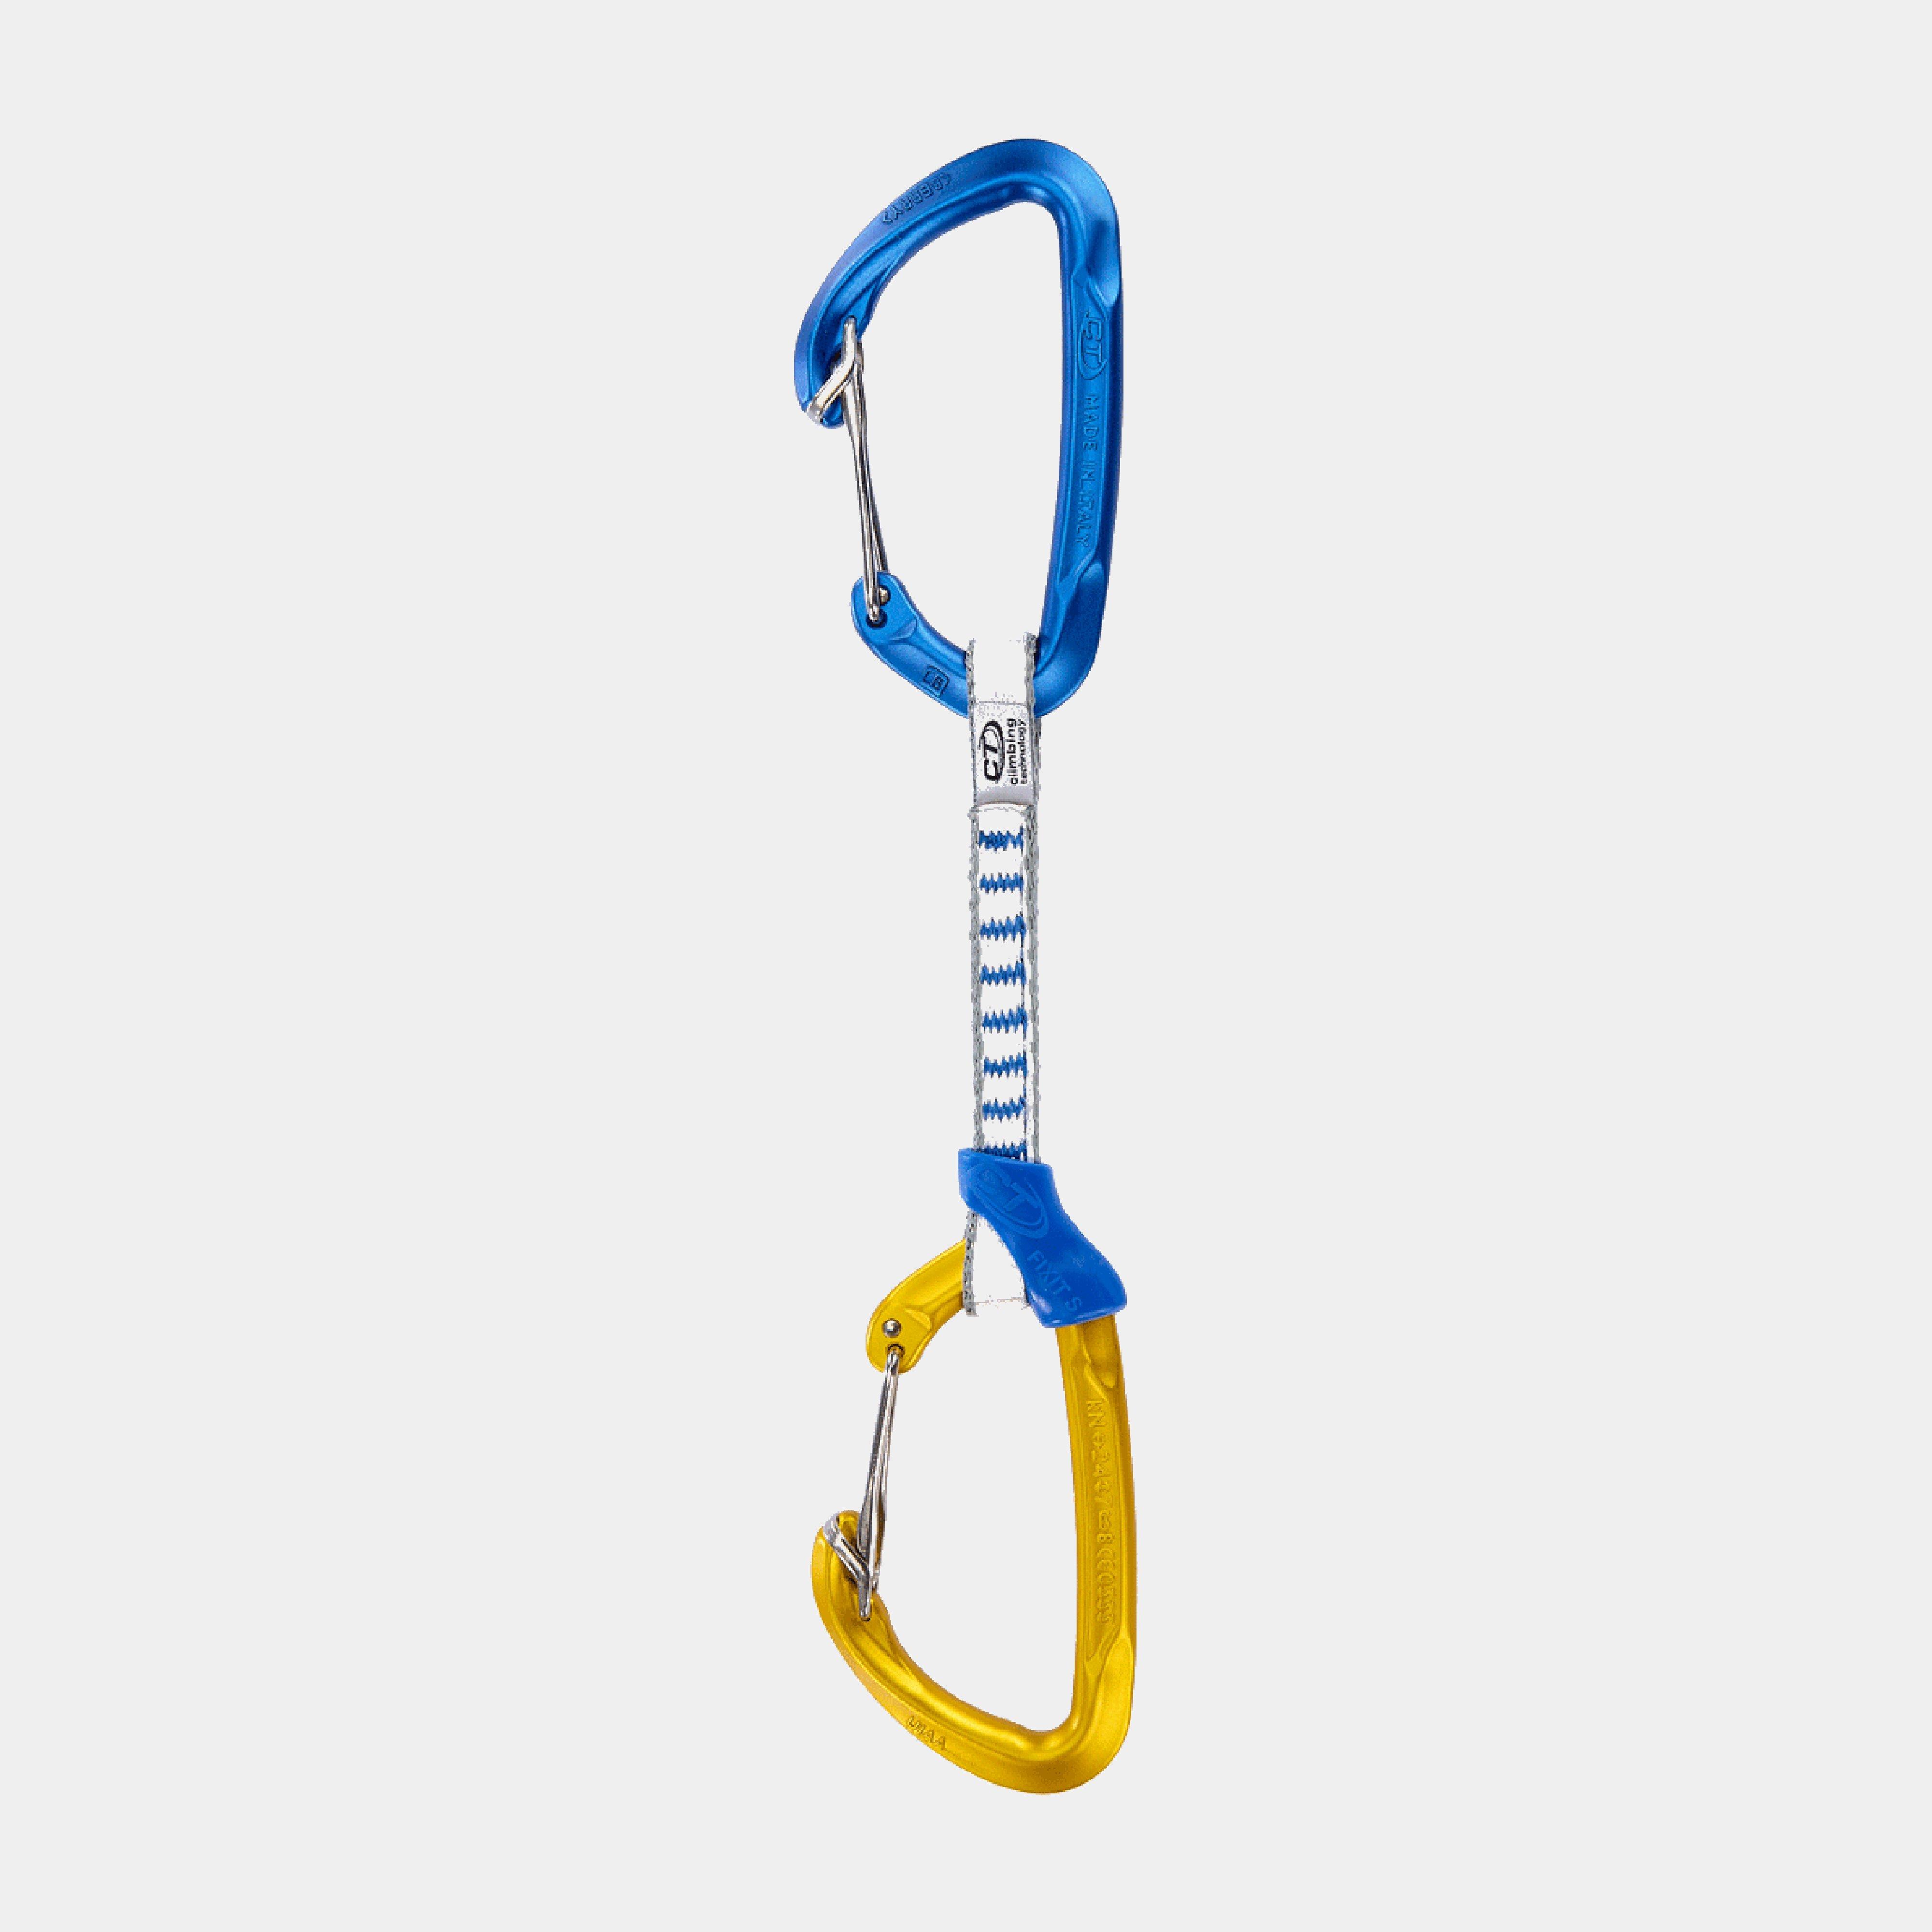 Climbing Technology Berry 12Cm Quickdraw 6 Pack - Blue, Blue